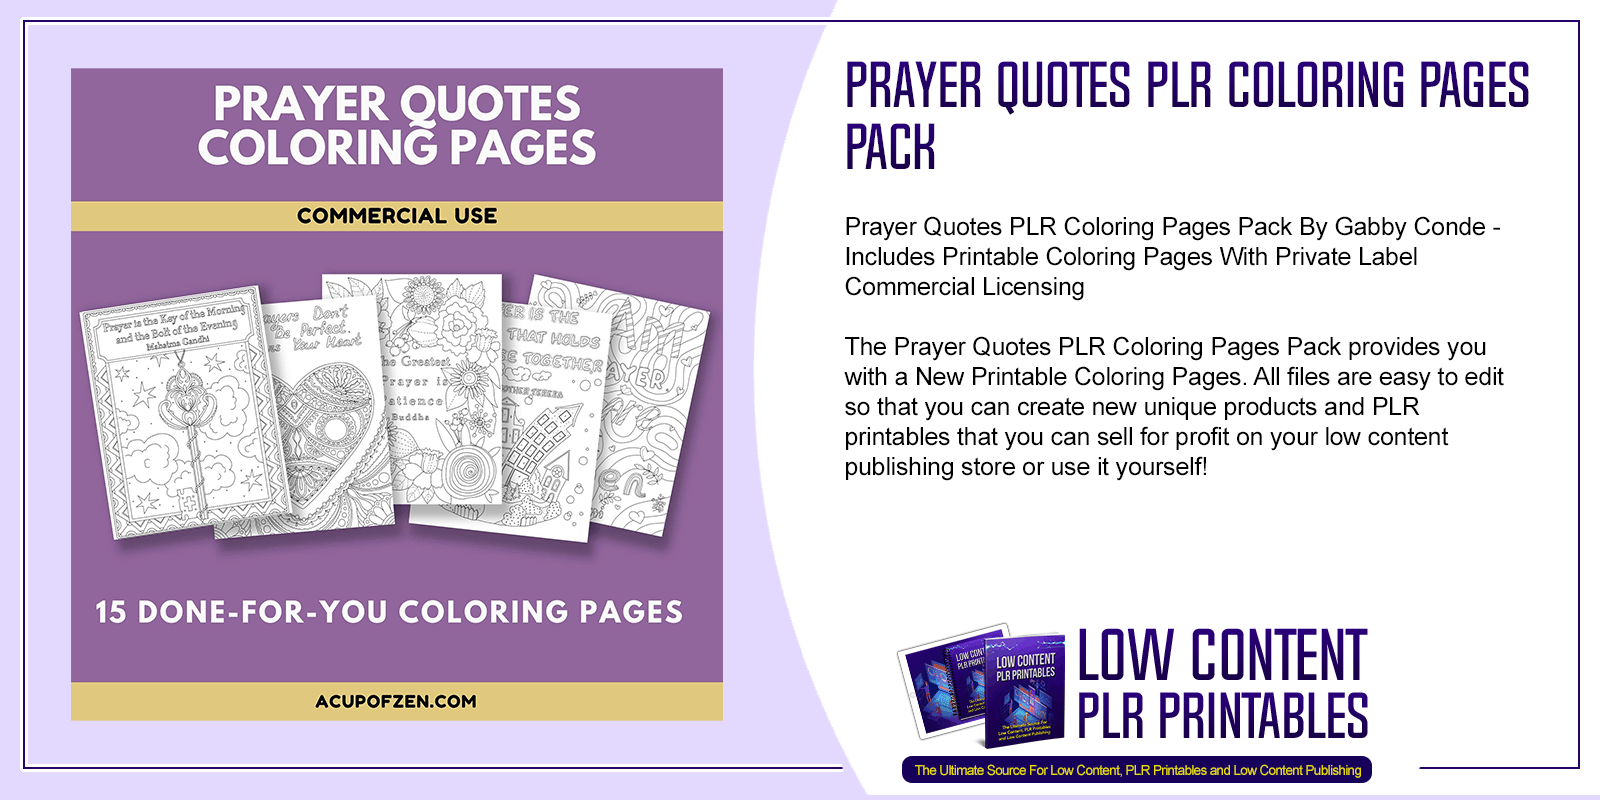 Prayer Quotes PLR Coloring Pages Pack